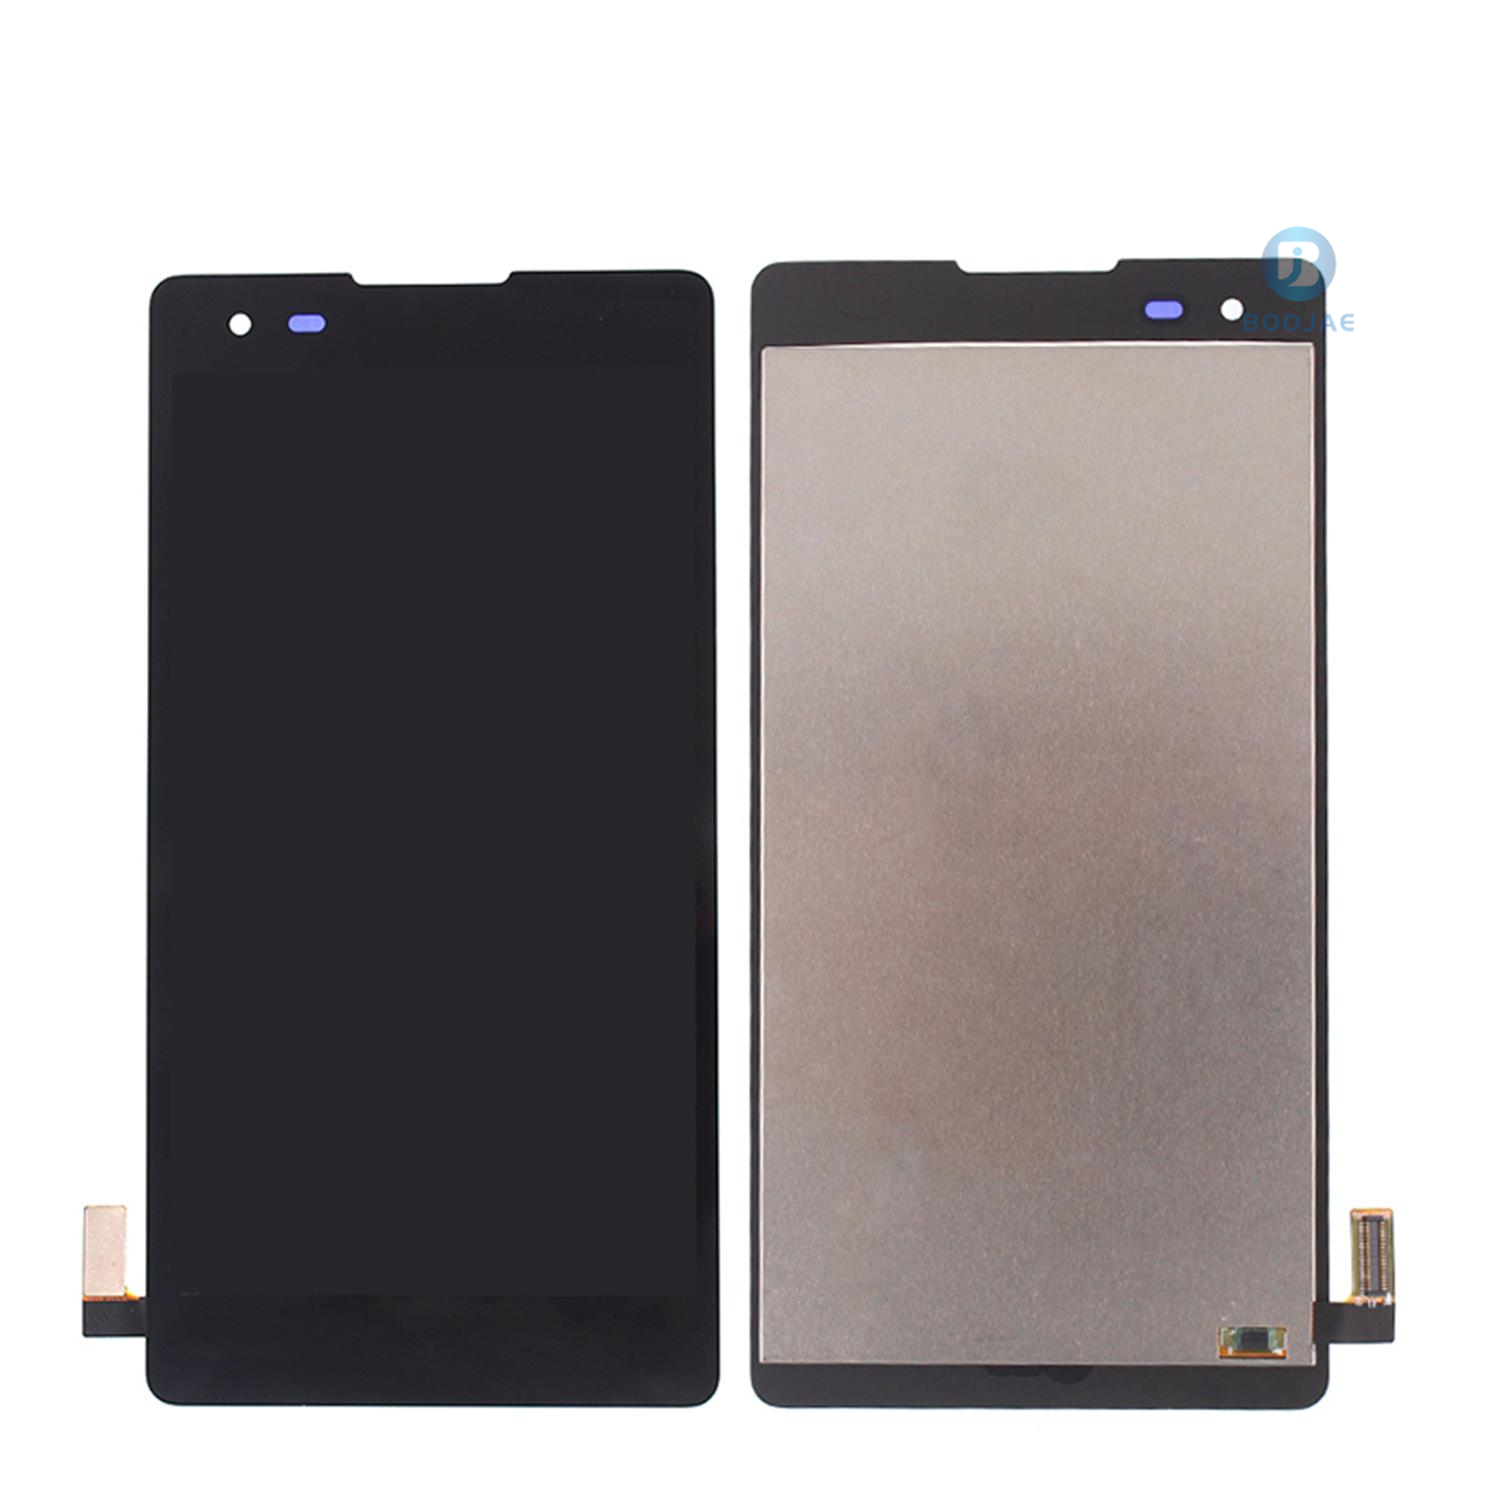 LG K6 LCD Screen Display, Lcd Assembly Replacement